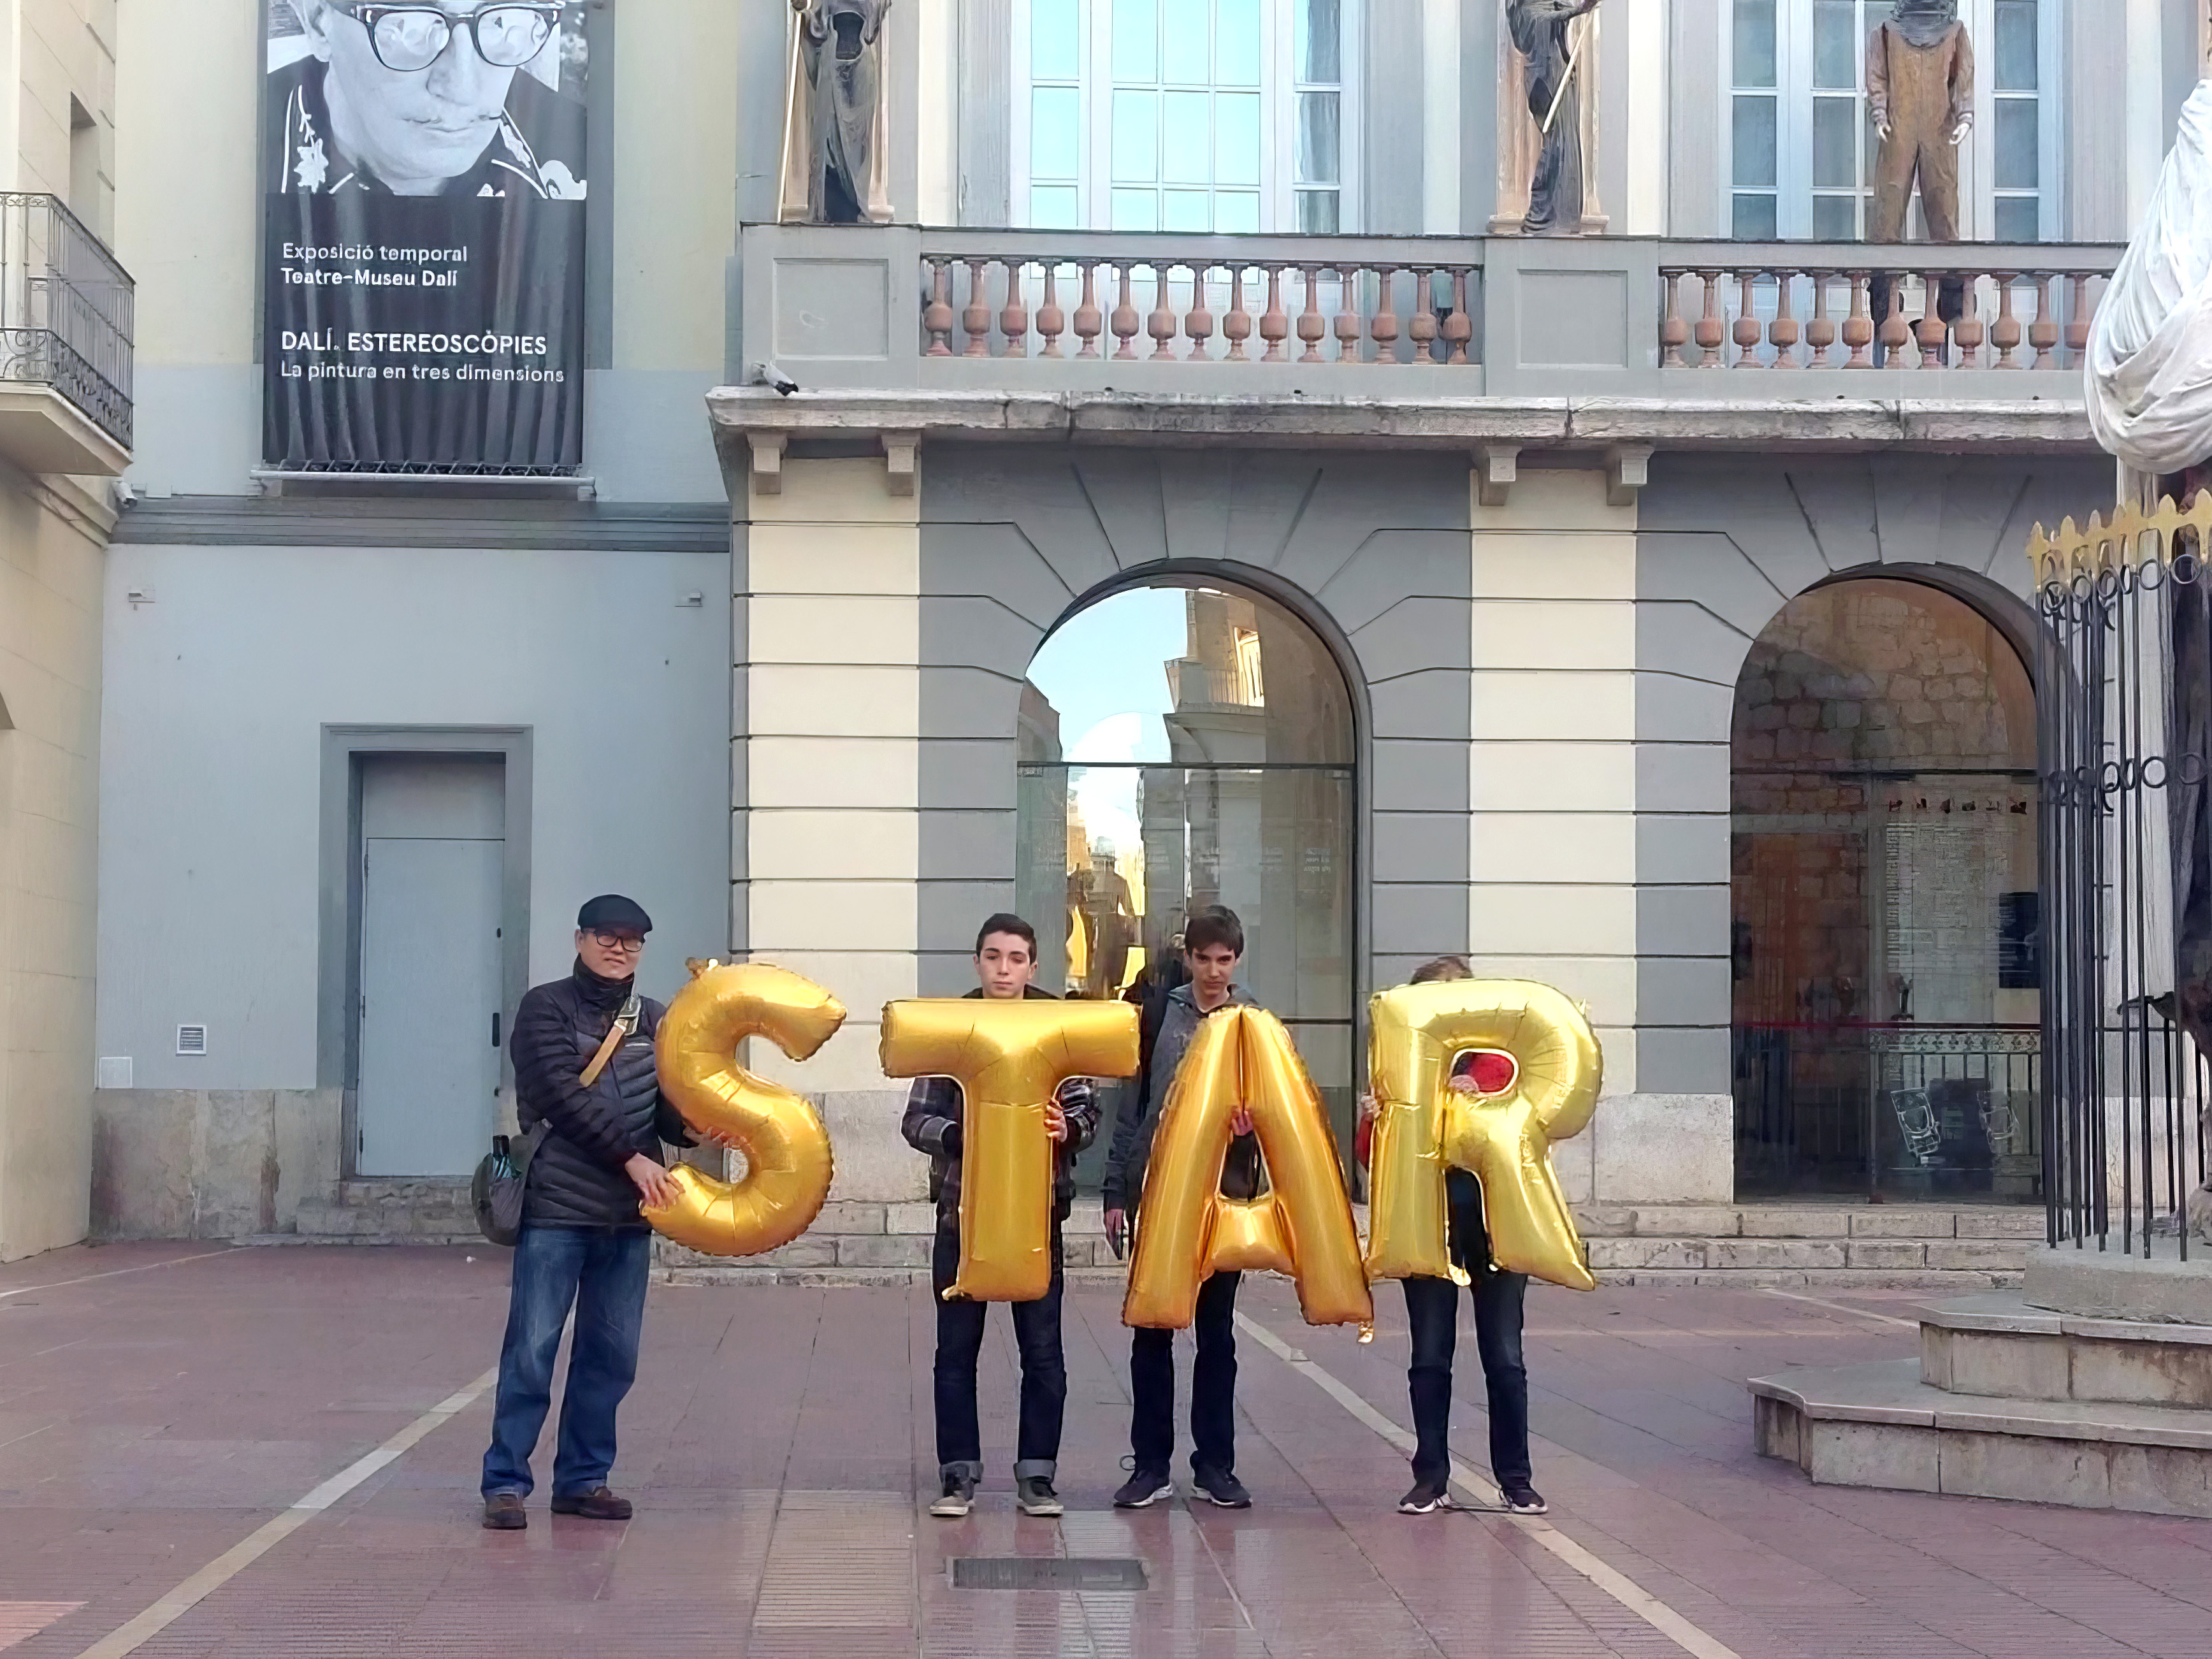 Spain, Figueres, Teatre-Museu Dalí - Star, Silence was Golden, gold balloons